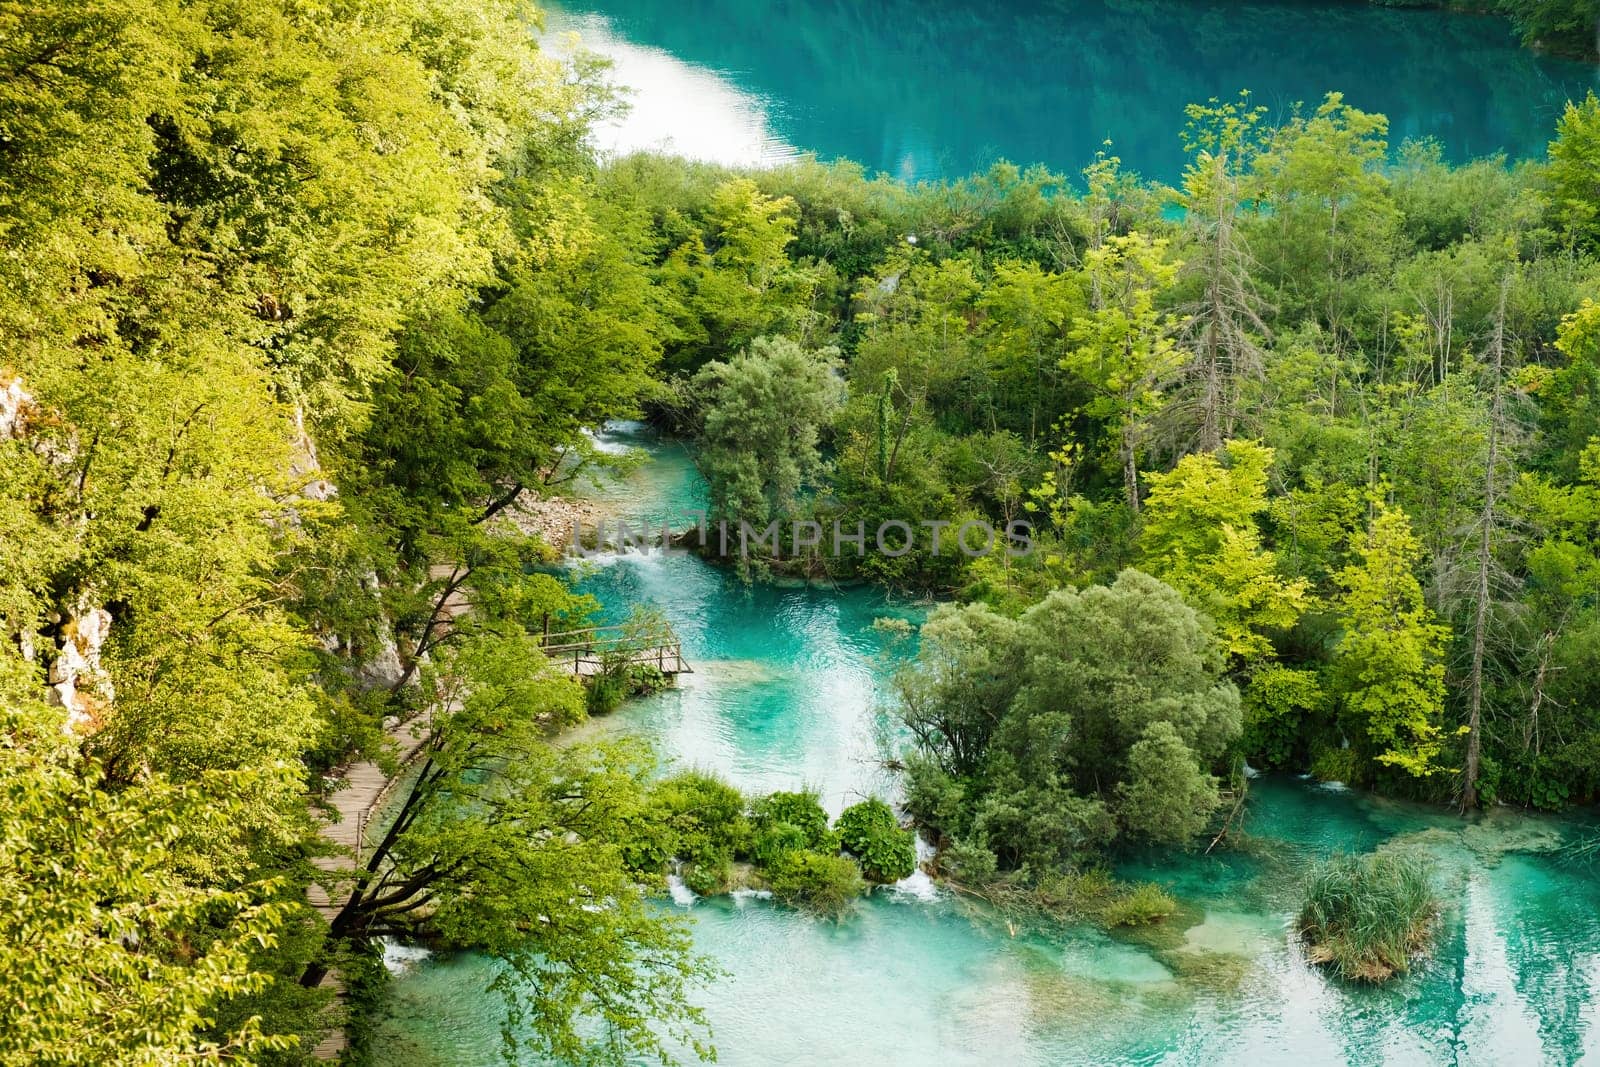 Breathtaking nature of deep blue lake surrounded by green forests on hilly banks. Natural park reserve as tourist attraction on Plitvice lakes upper view